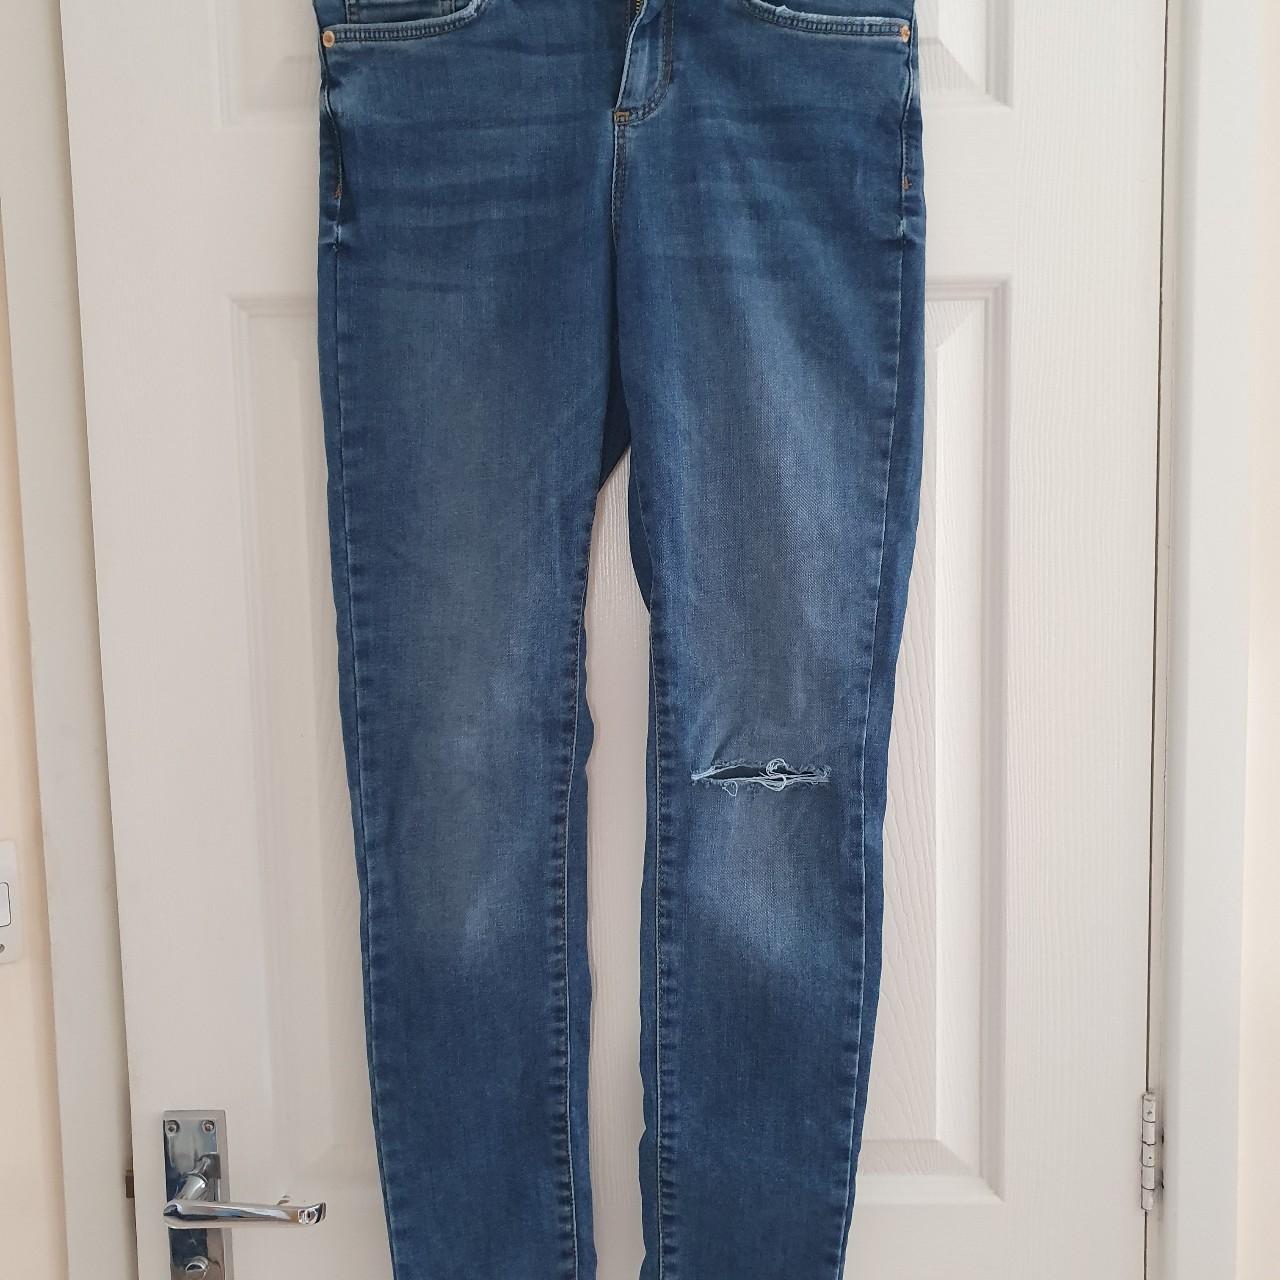 jeans size Tesco lovely with... - Depop